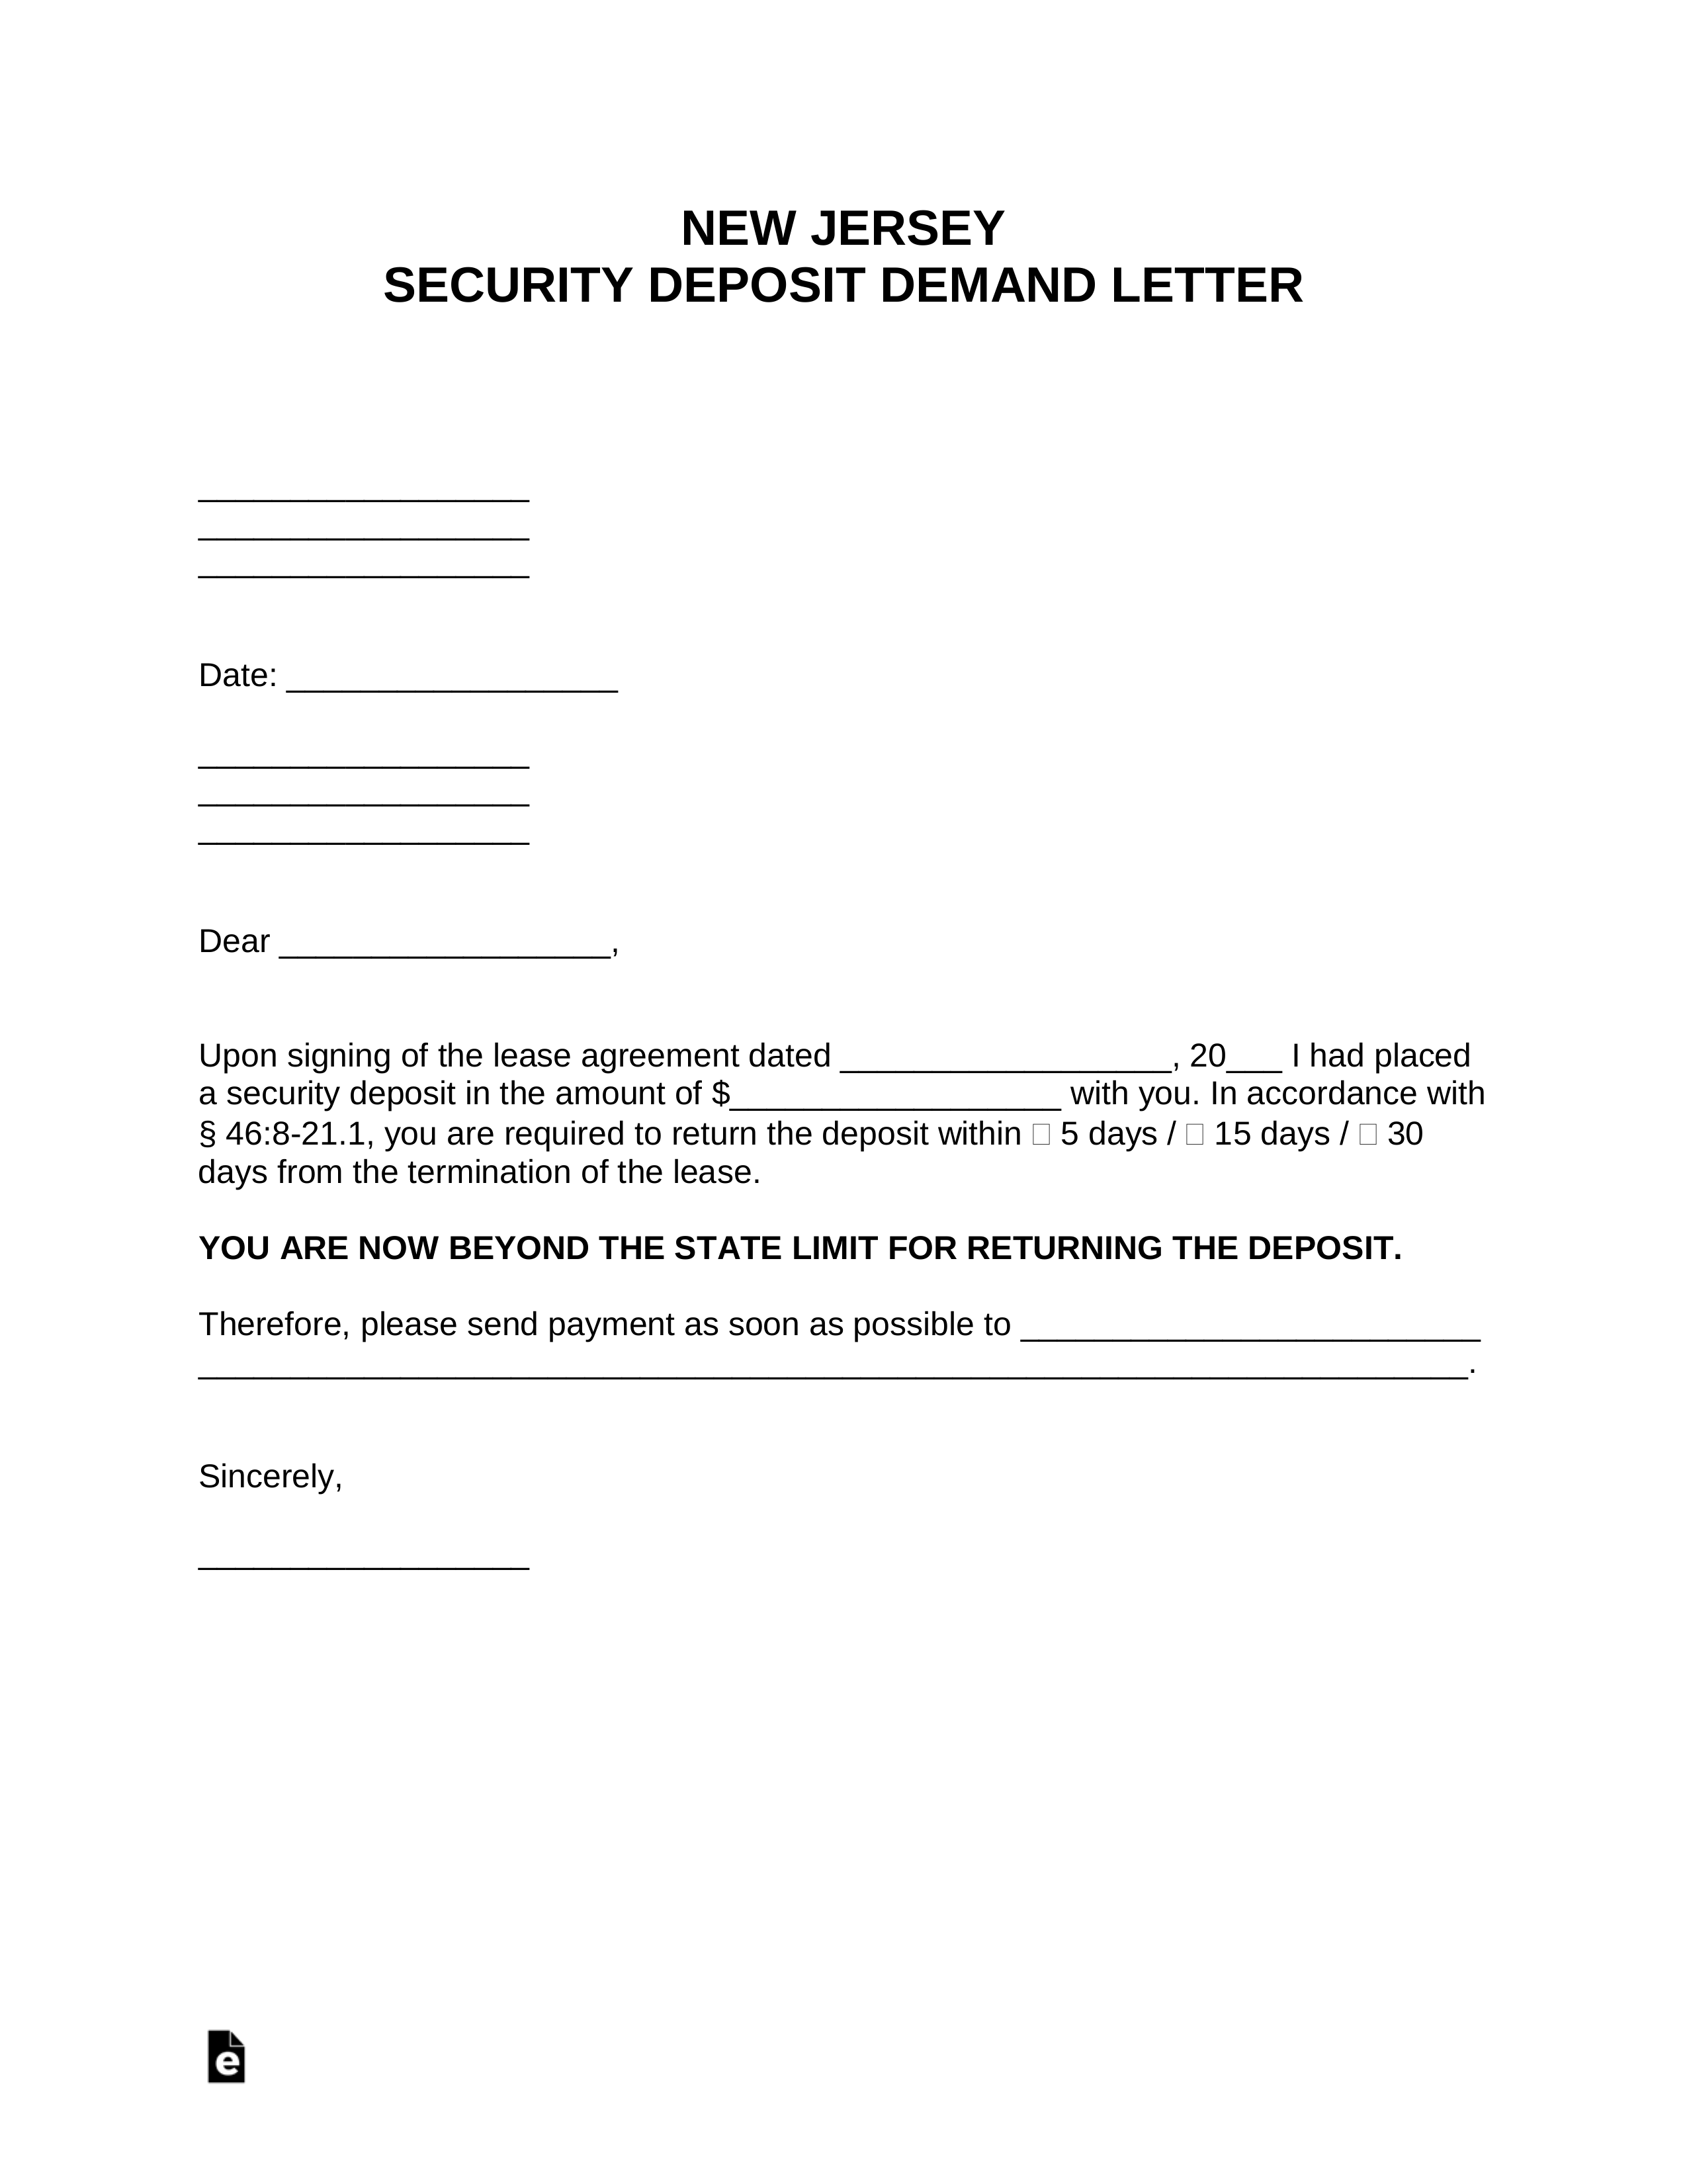 Free New Jersey Security Deposit Demand Letter - PDF  Word – eForms Intended For Return Of Security Deposit Form Letter Regarding Return Of Security Deposit Form Letter